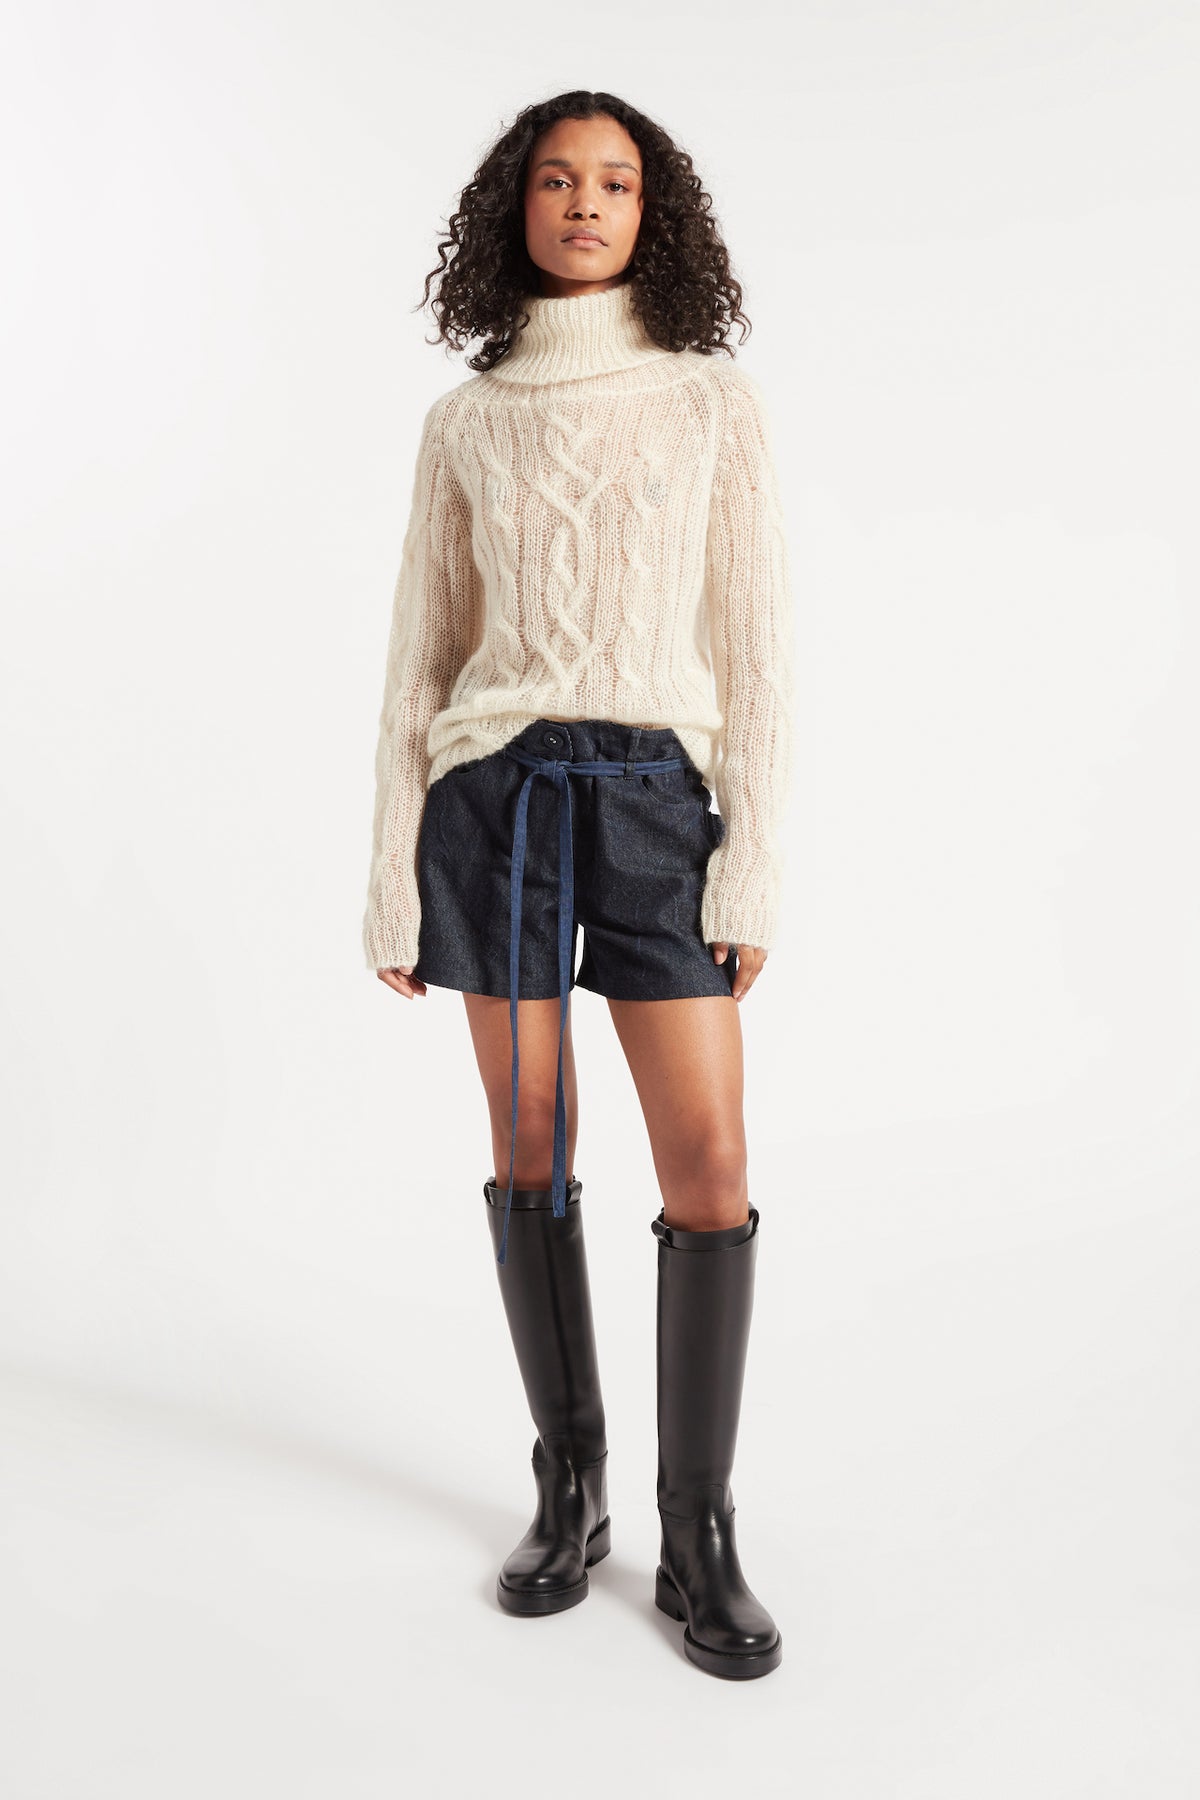 Ophelia Knit in Ivory | Noon By Noor